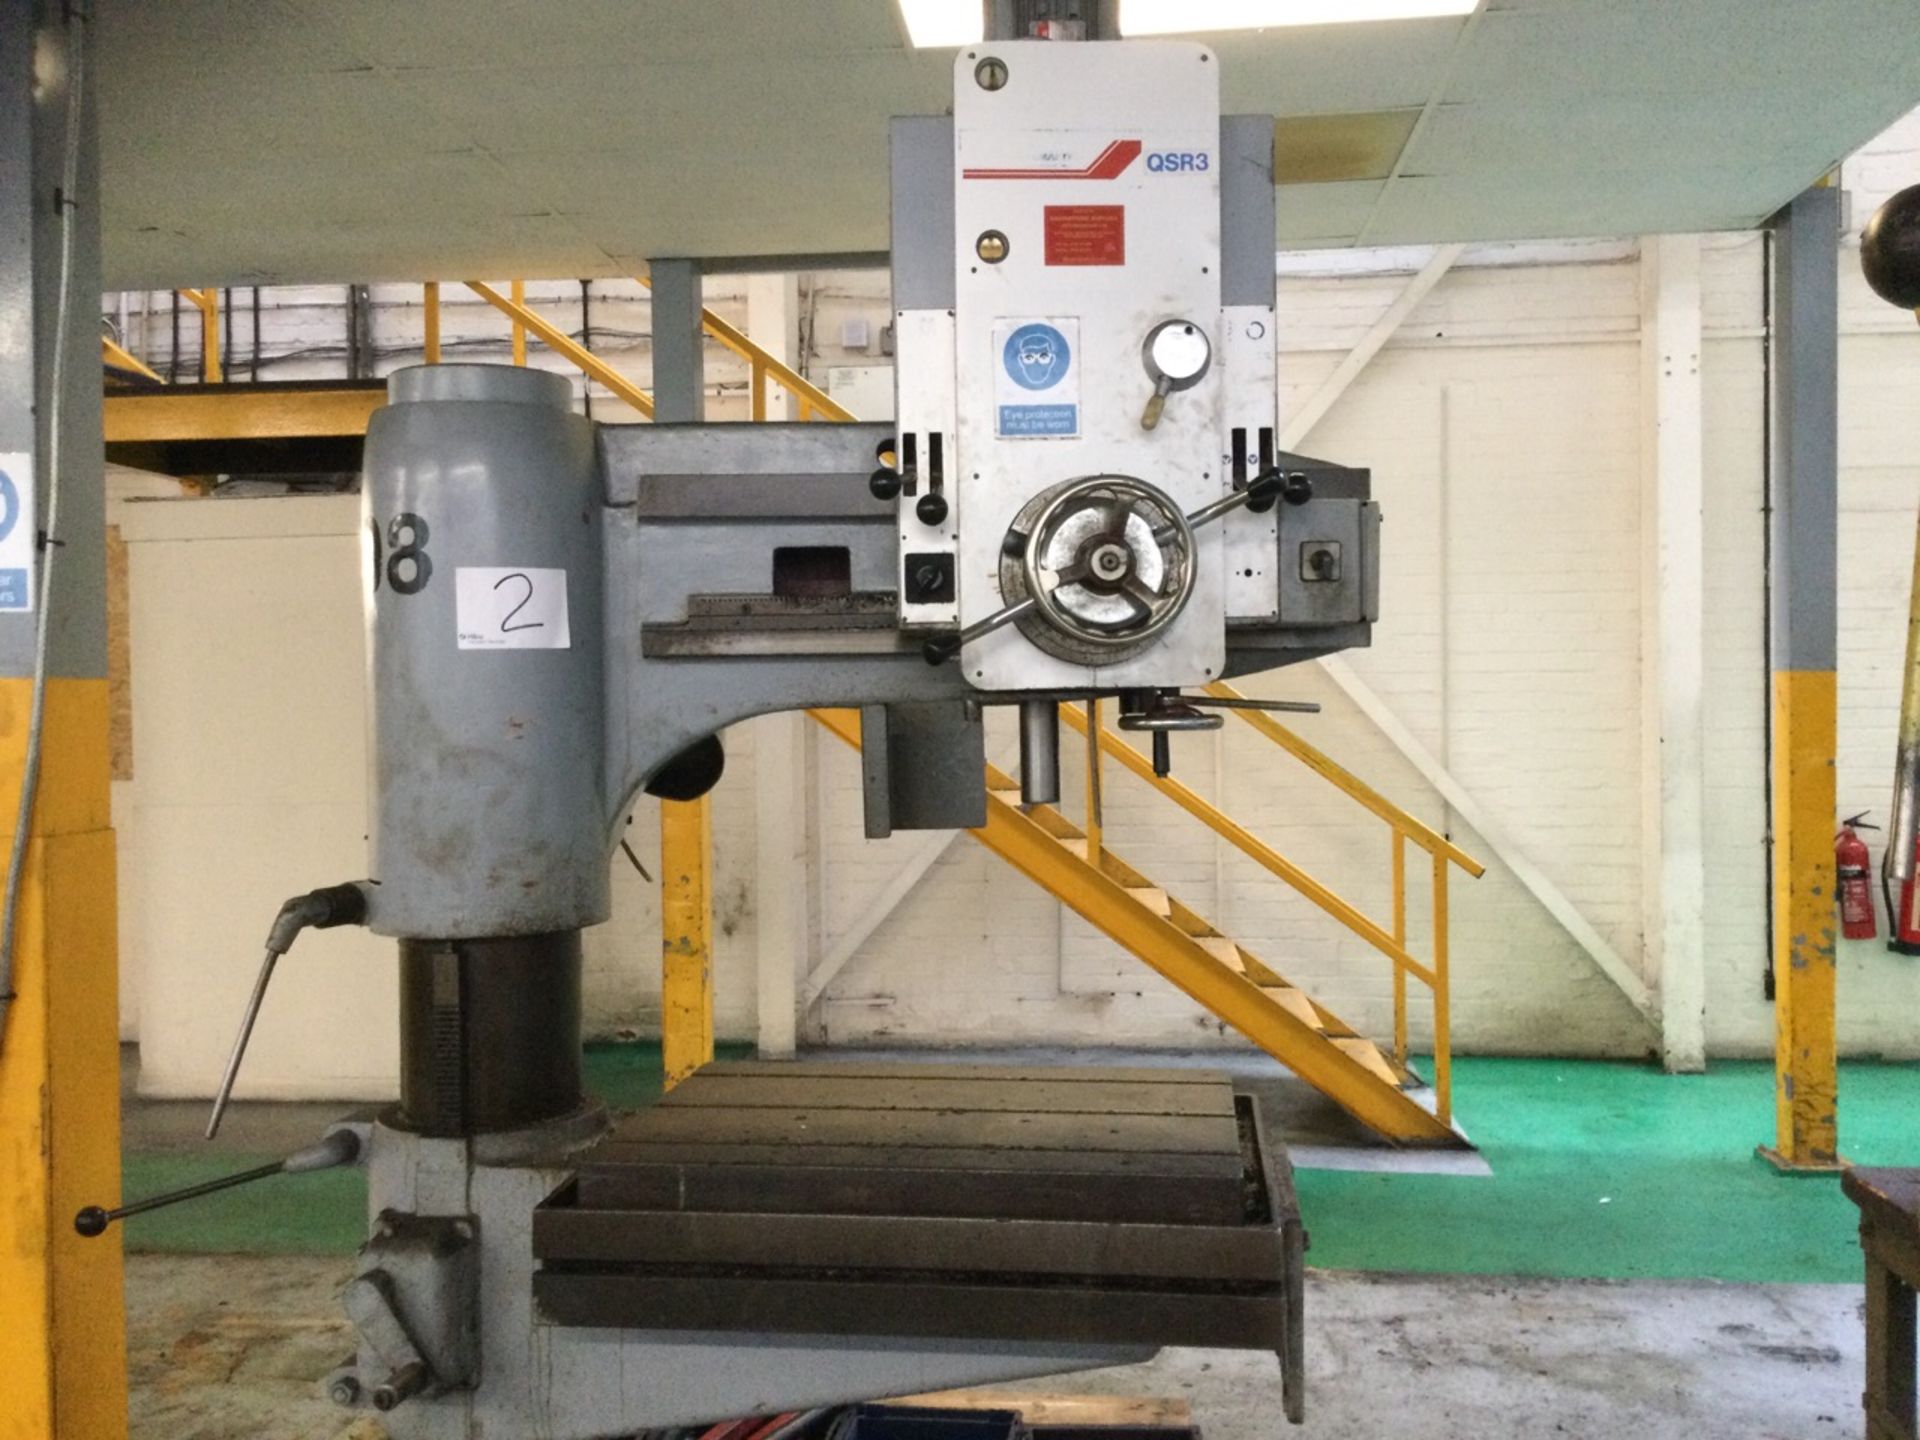 1 Qualters & Smith , QSR 3, Radial arm drill, fixed height with rise and fall table, 36" radius capa - Image 2 of 2